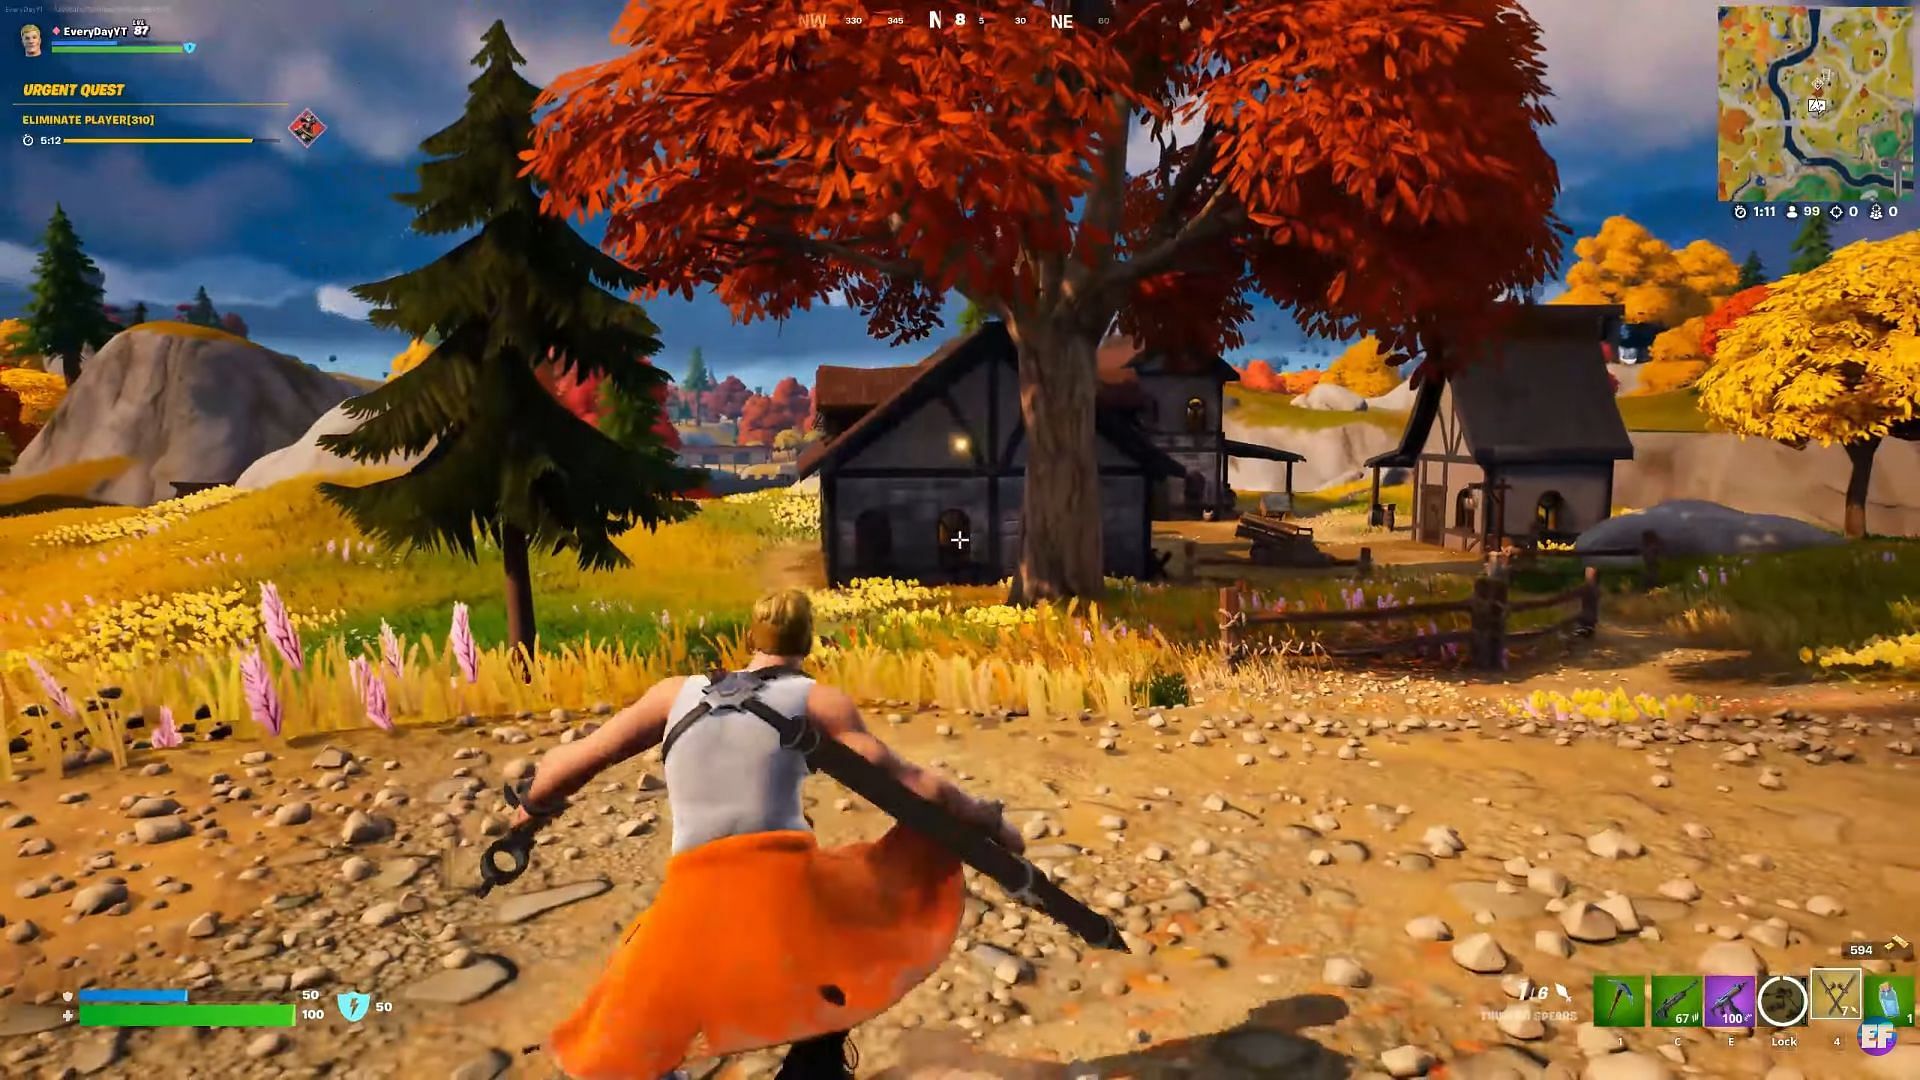 Thunder Spears can be used to deliver explosive attacks in Fortnite (Image via YouTube/EveryDay FN)